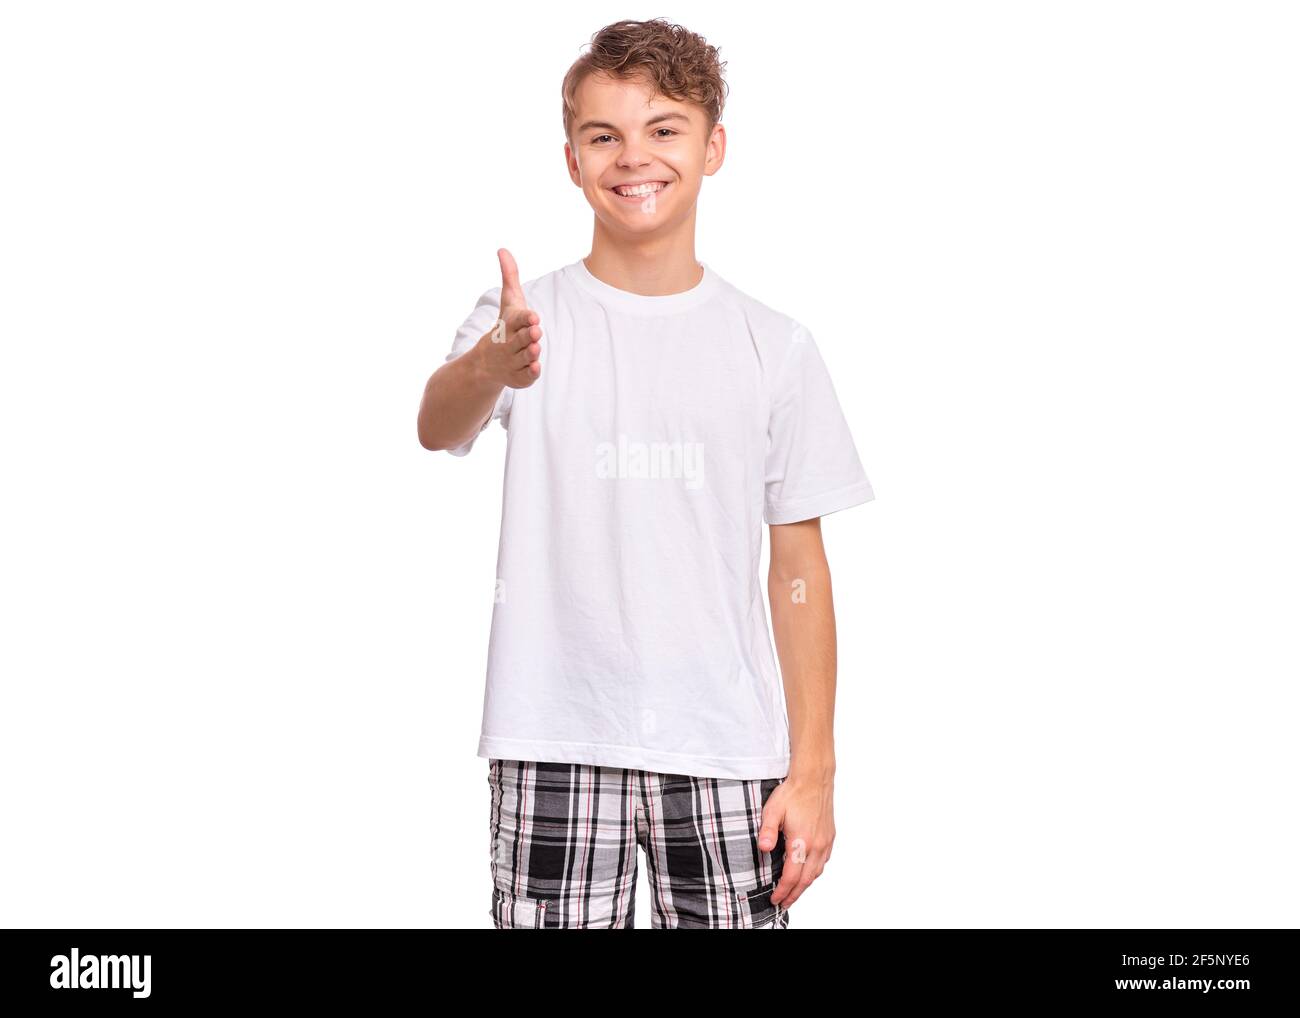 Handsome teen boy stretching his right hand up for greeting, isolated on white background Stock Photo